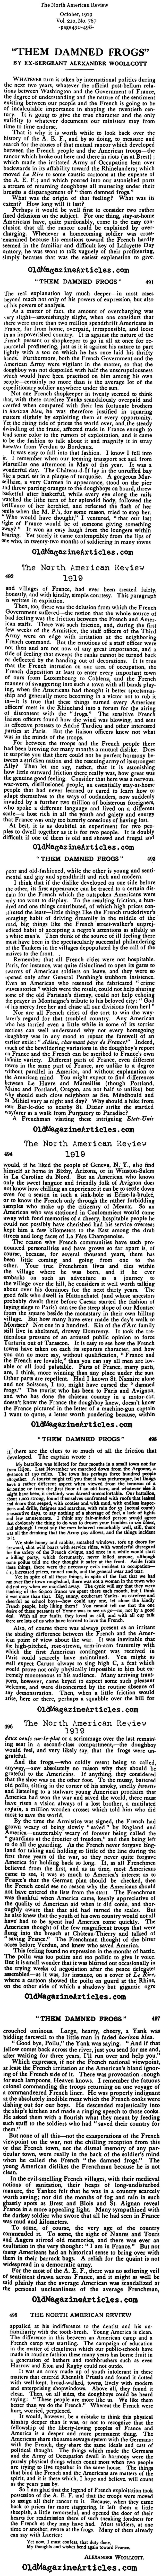 1919: Franco-American Relationship Begin to Cool (The North American Review, 1919)